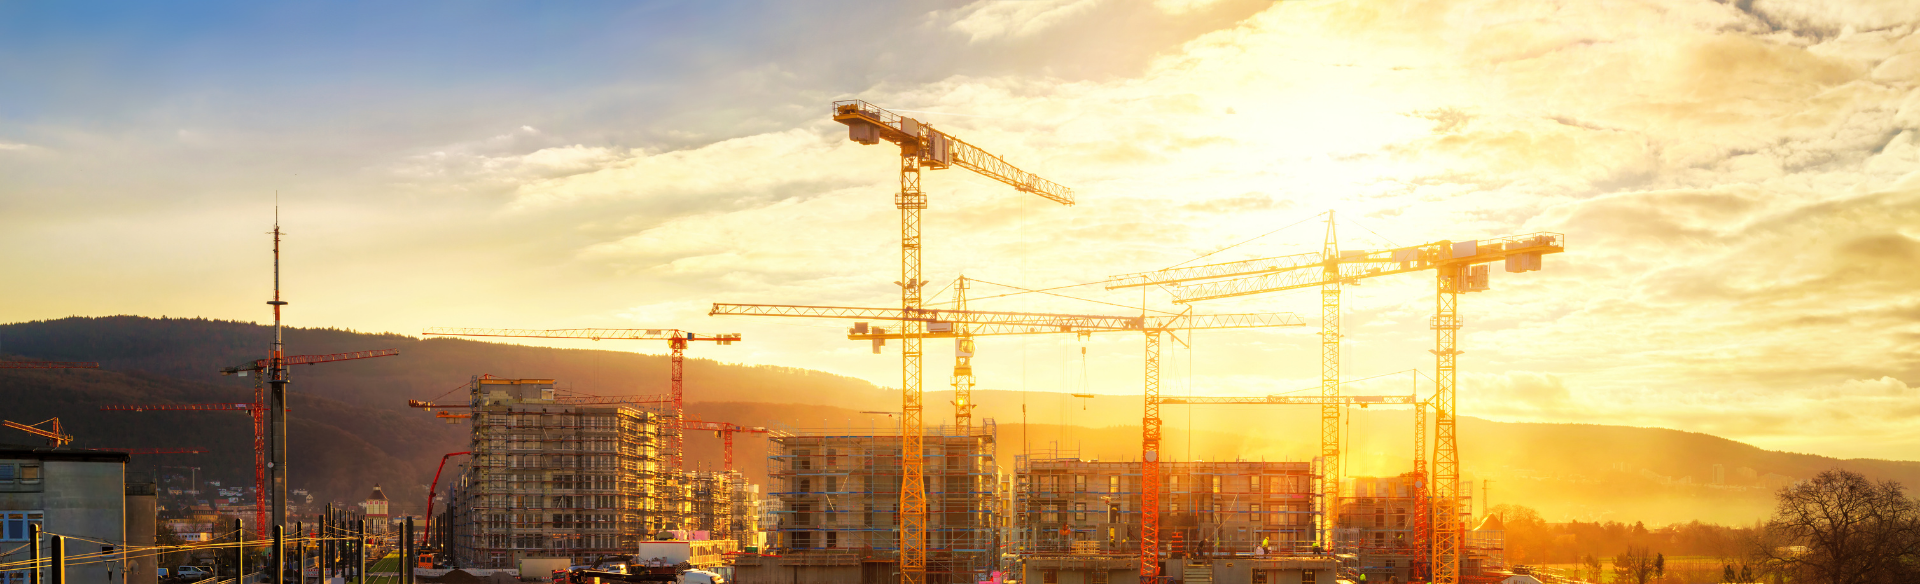 Legal Tips for Every Construction Site featured image